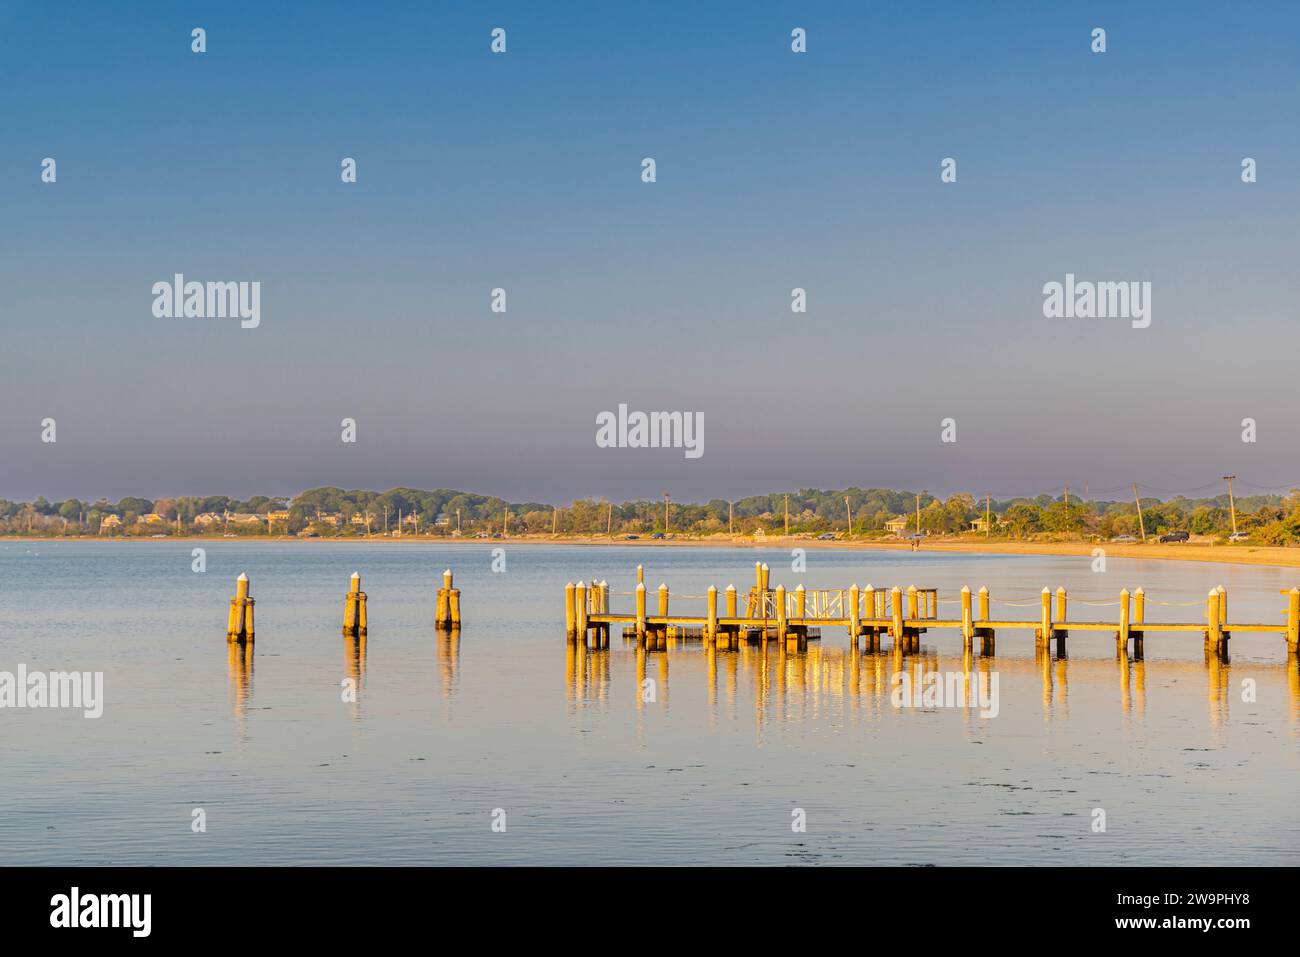 image of a dock and long beach in the distance Stock Photo